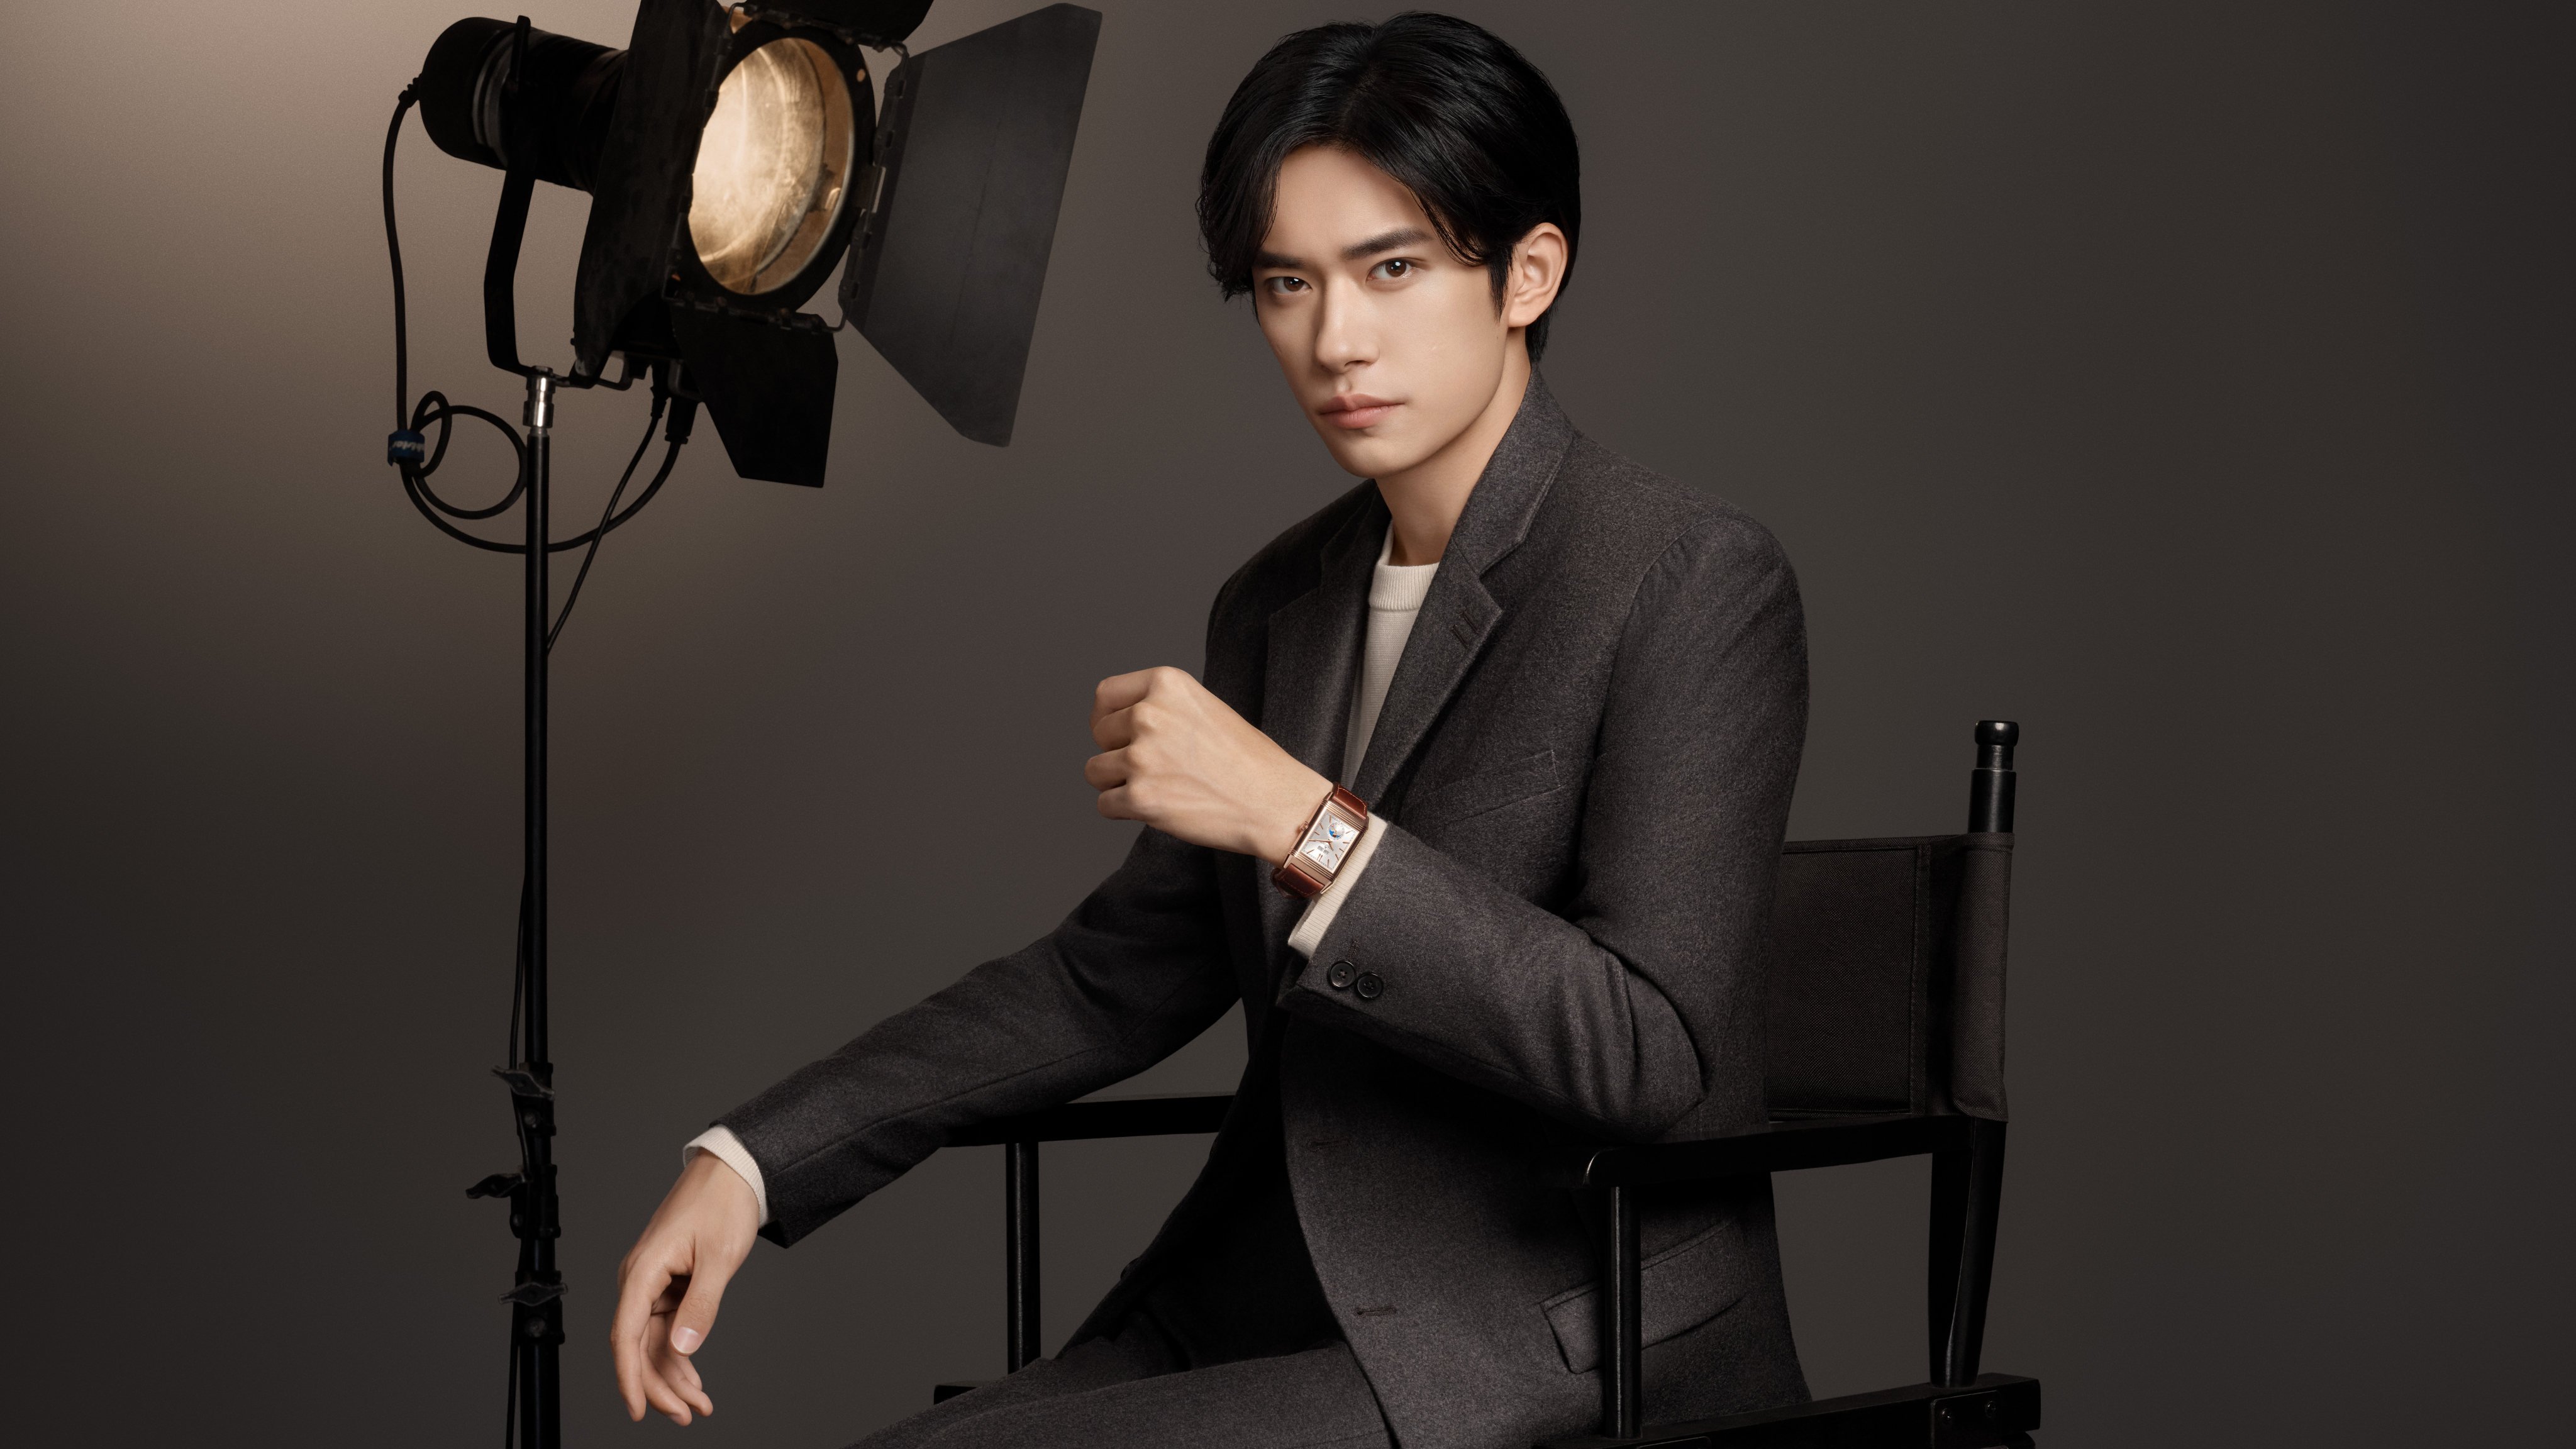 Jackson Yee has scored multiple endorsements over the years, including this one with Swiss watchmaker Jaeger LeCoultre. Photo: Jaeger-LeCoultre